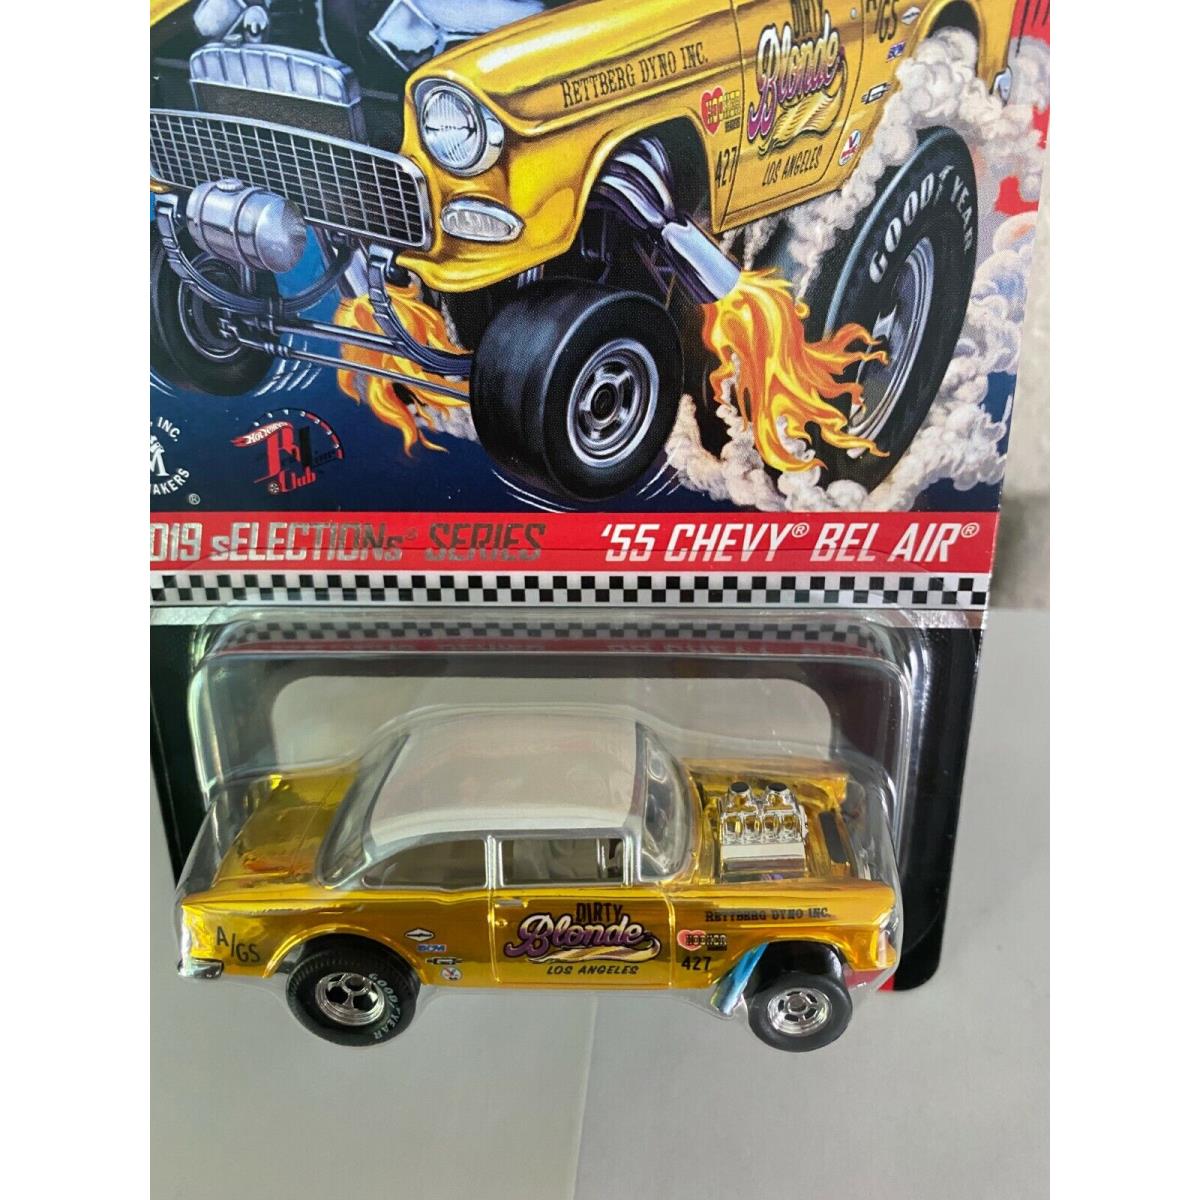 Hot Wheels toy Chevy Bel Air - Yellow